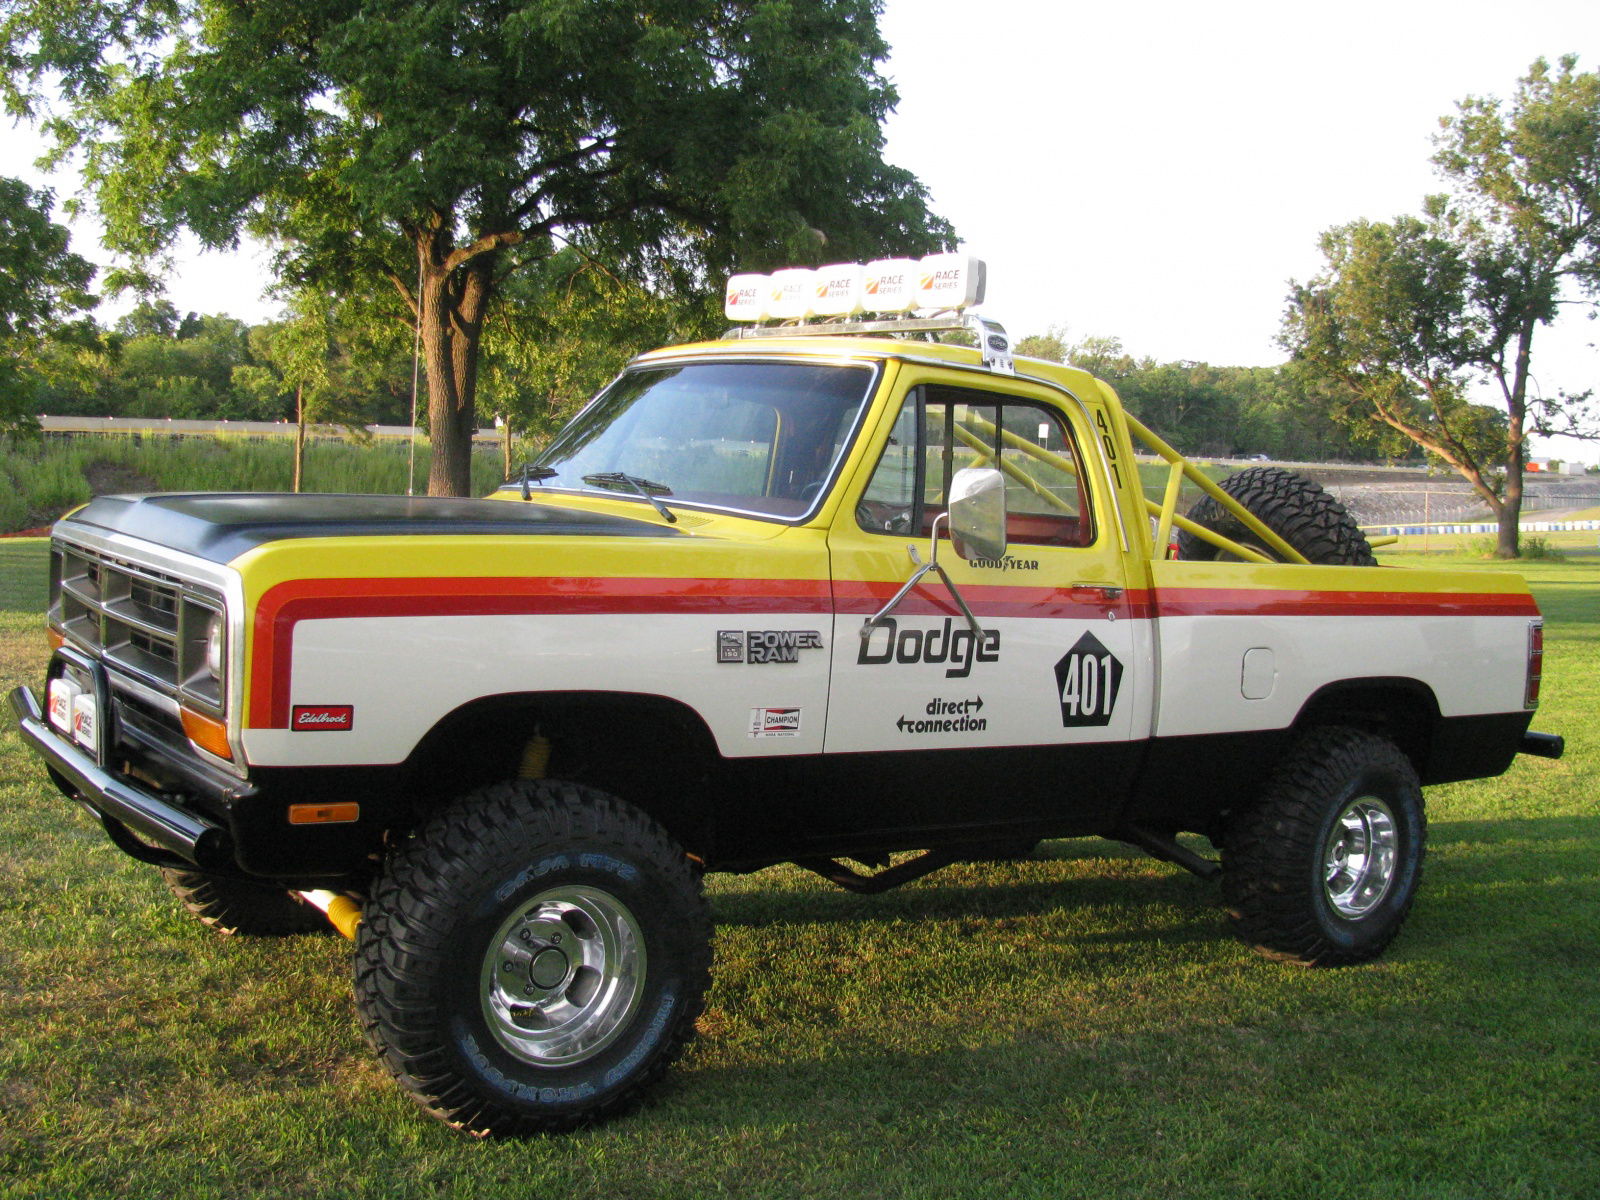 Toughest pickup trucks in the world - Dodge Rod Hall Signature Edition Via Barn Finds.